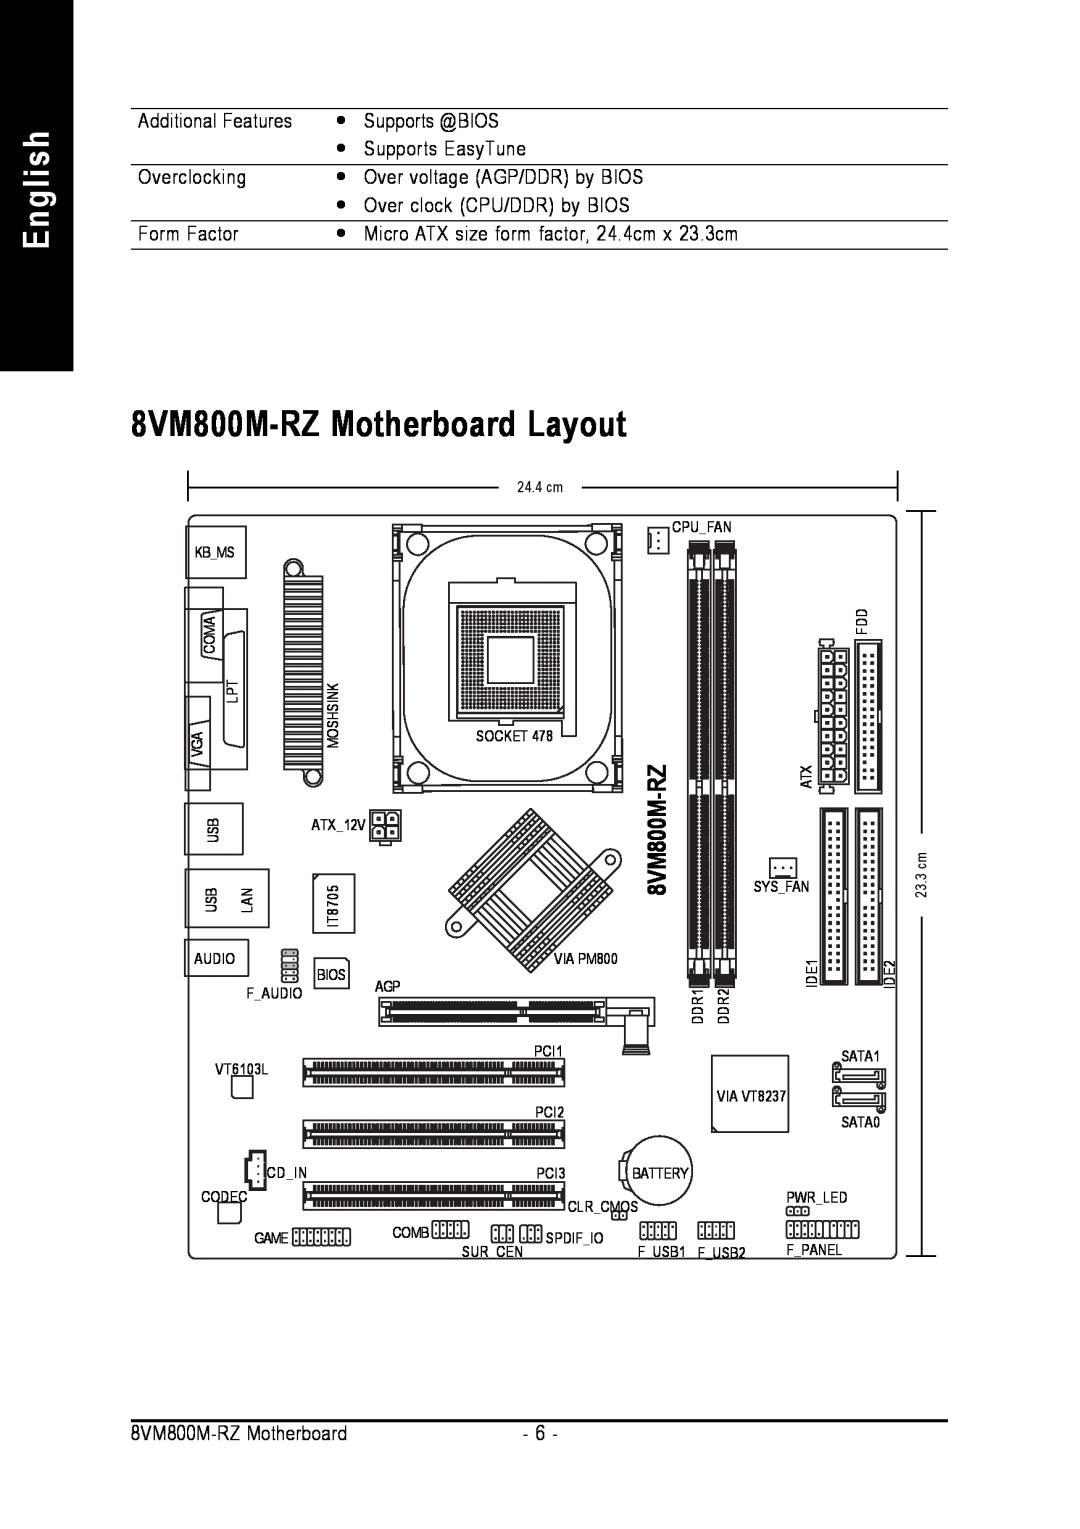 Intel user manual 8VM800M-RZMotherboard Layout, English 